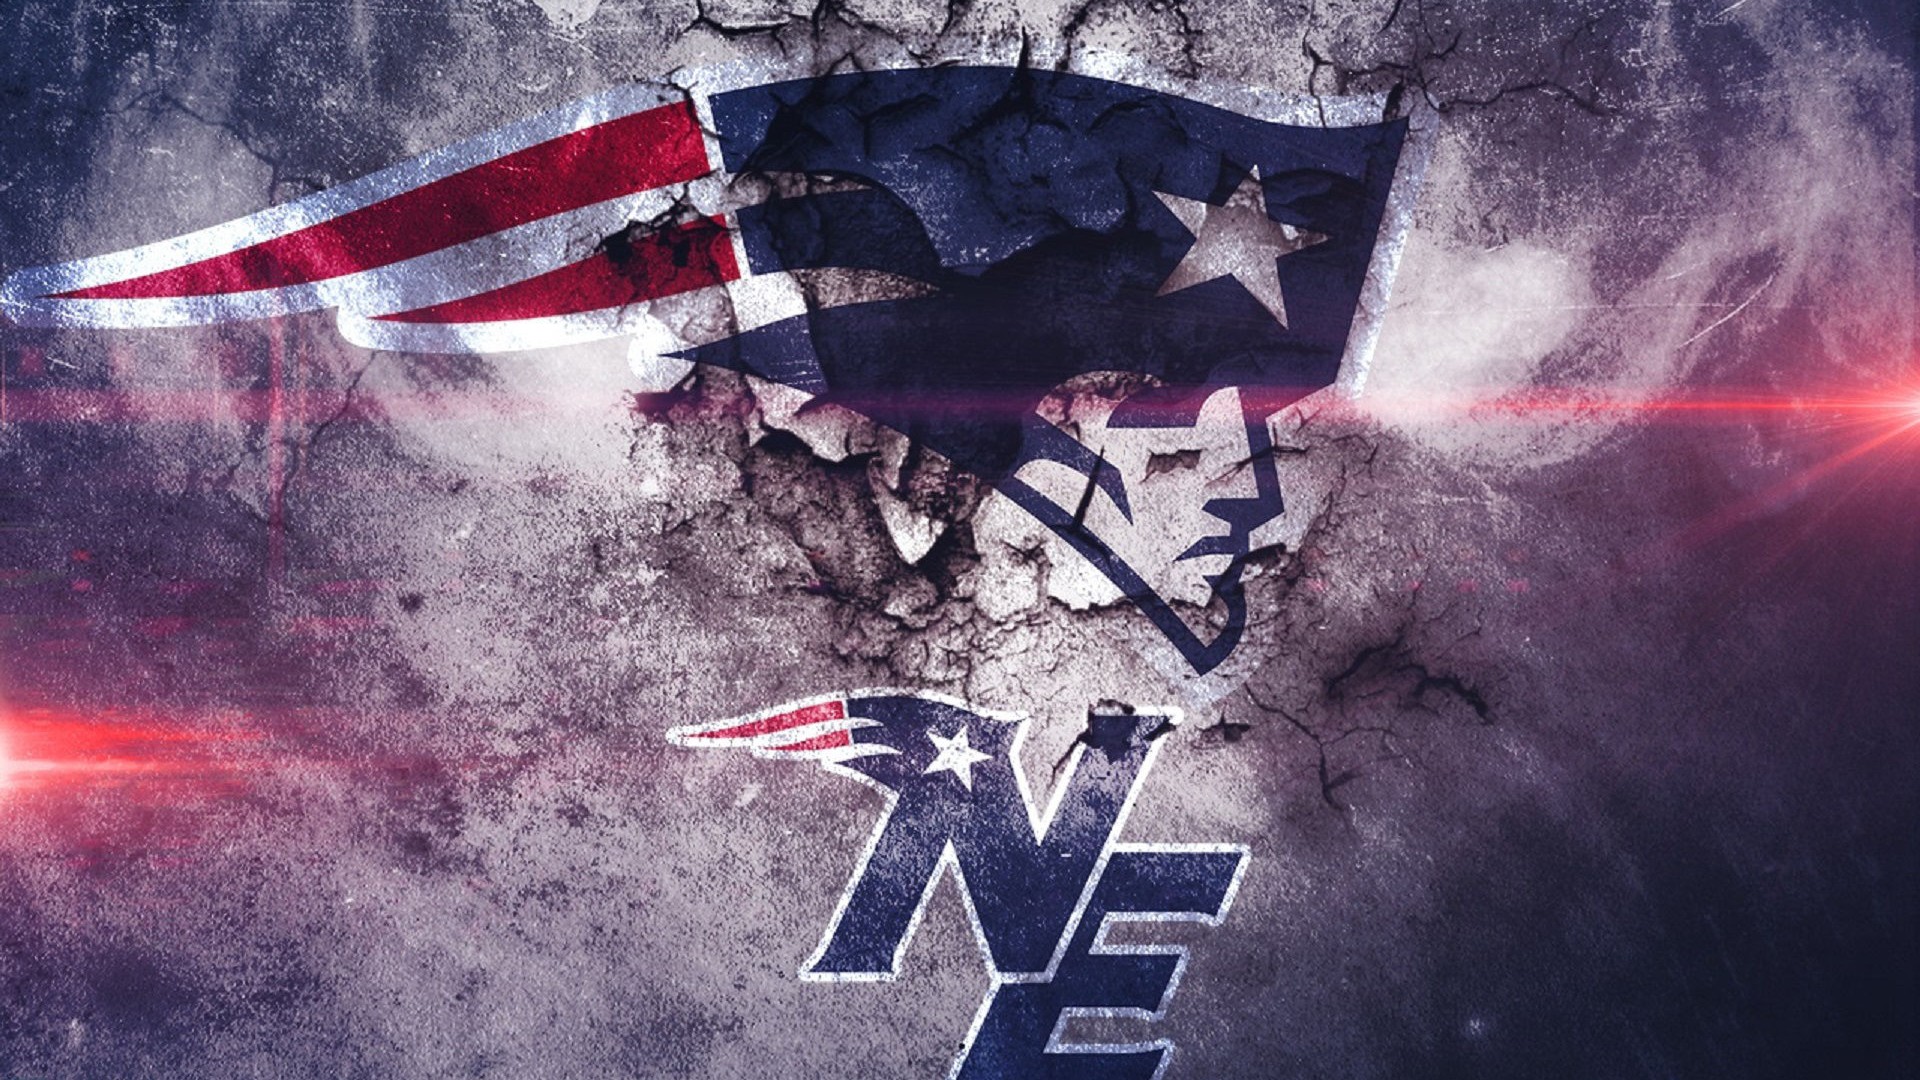 Wallpapers HD New England Patriots With Resolution 1920X1080 pixel. You can make this wallpaper for your Mac or Windows Desktop Background, iPhone, Android or Tablet and another Smartphone device for free